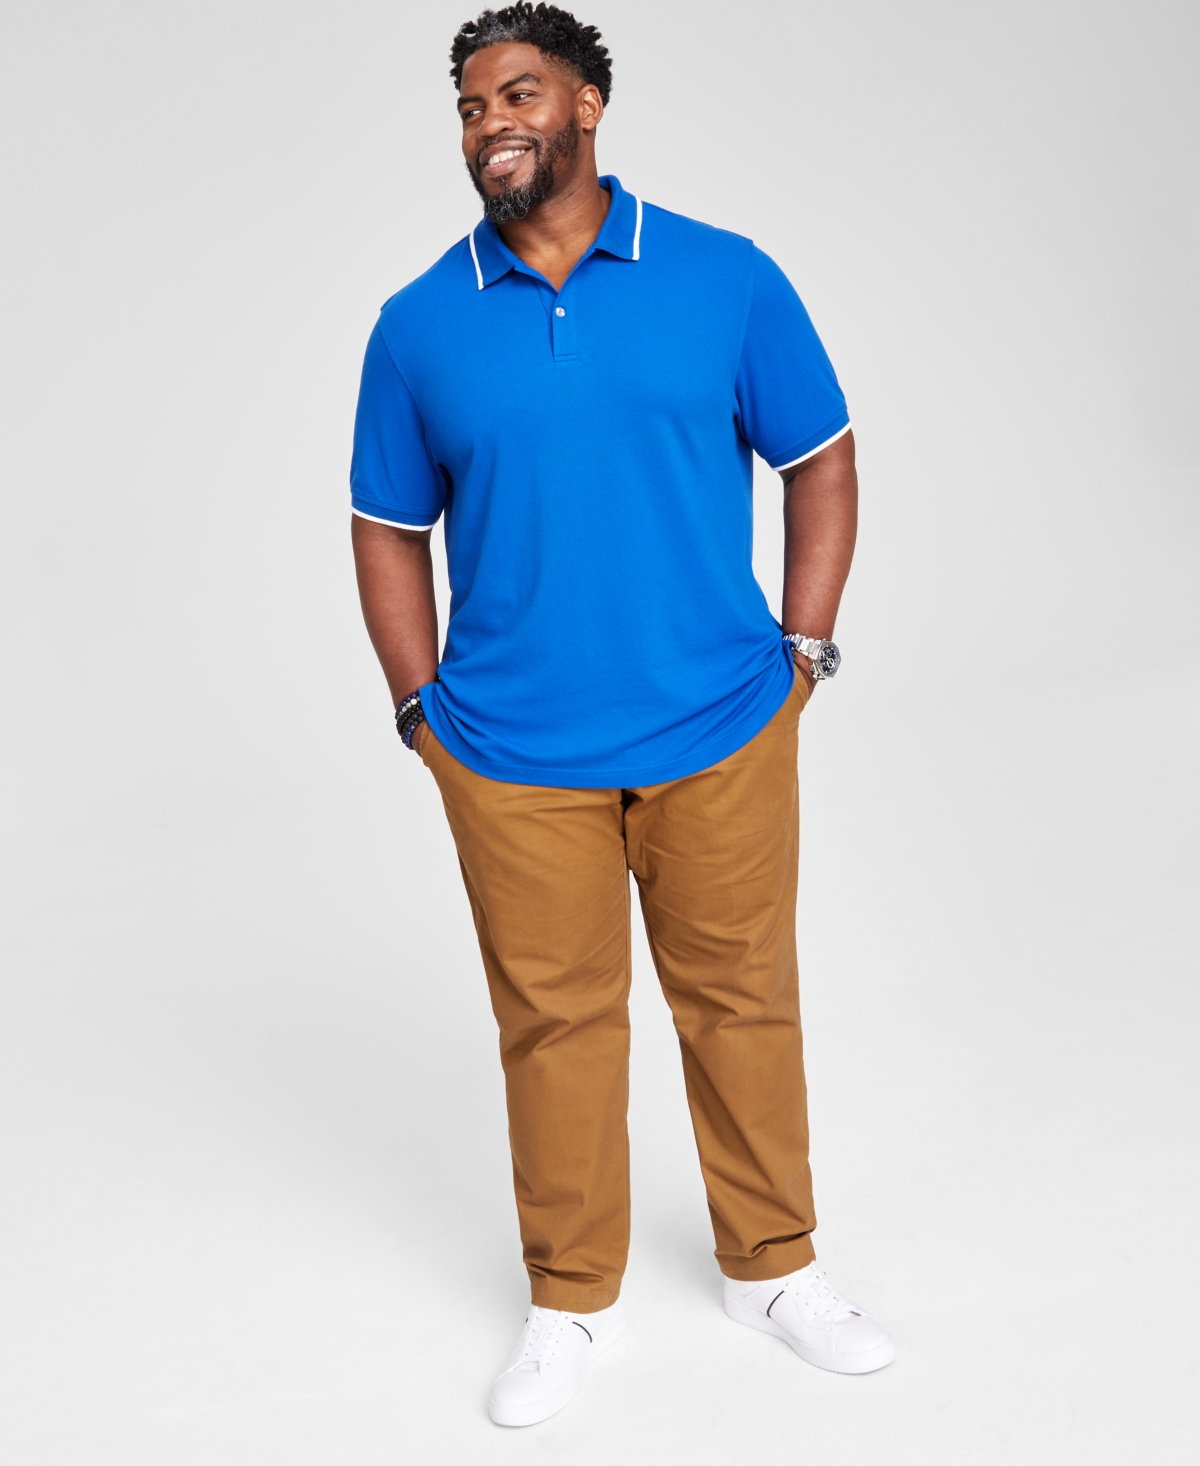 Men's Regular-Fit Tipped Performance Polo Shirt, Created for Macy's - Royal Blue